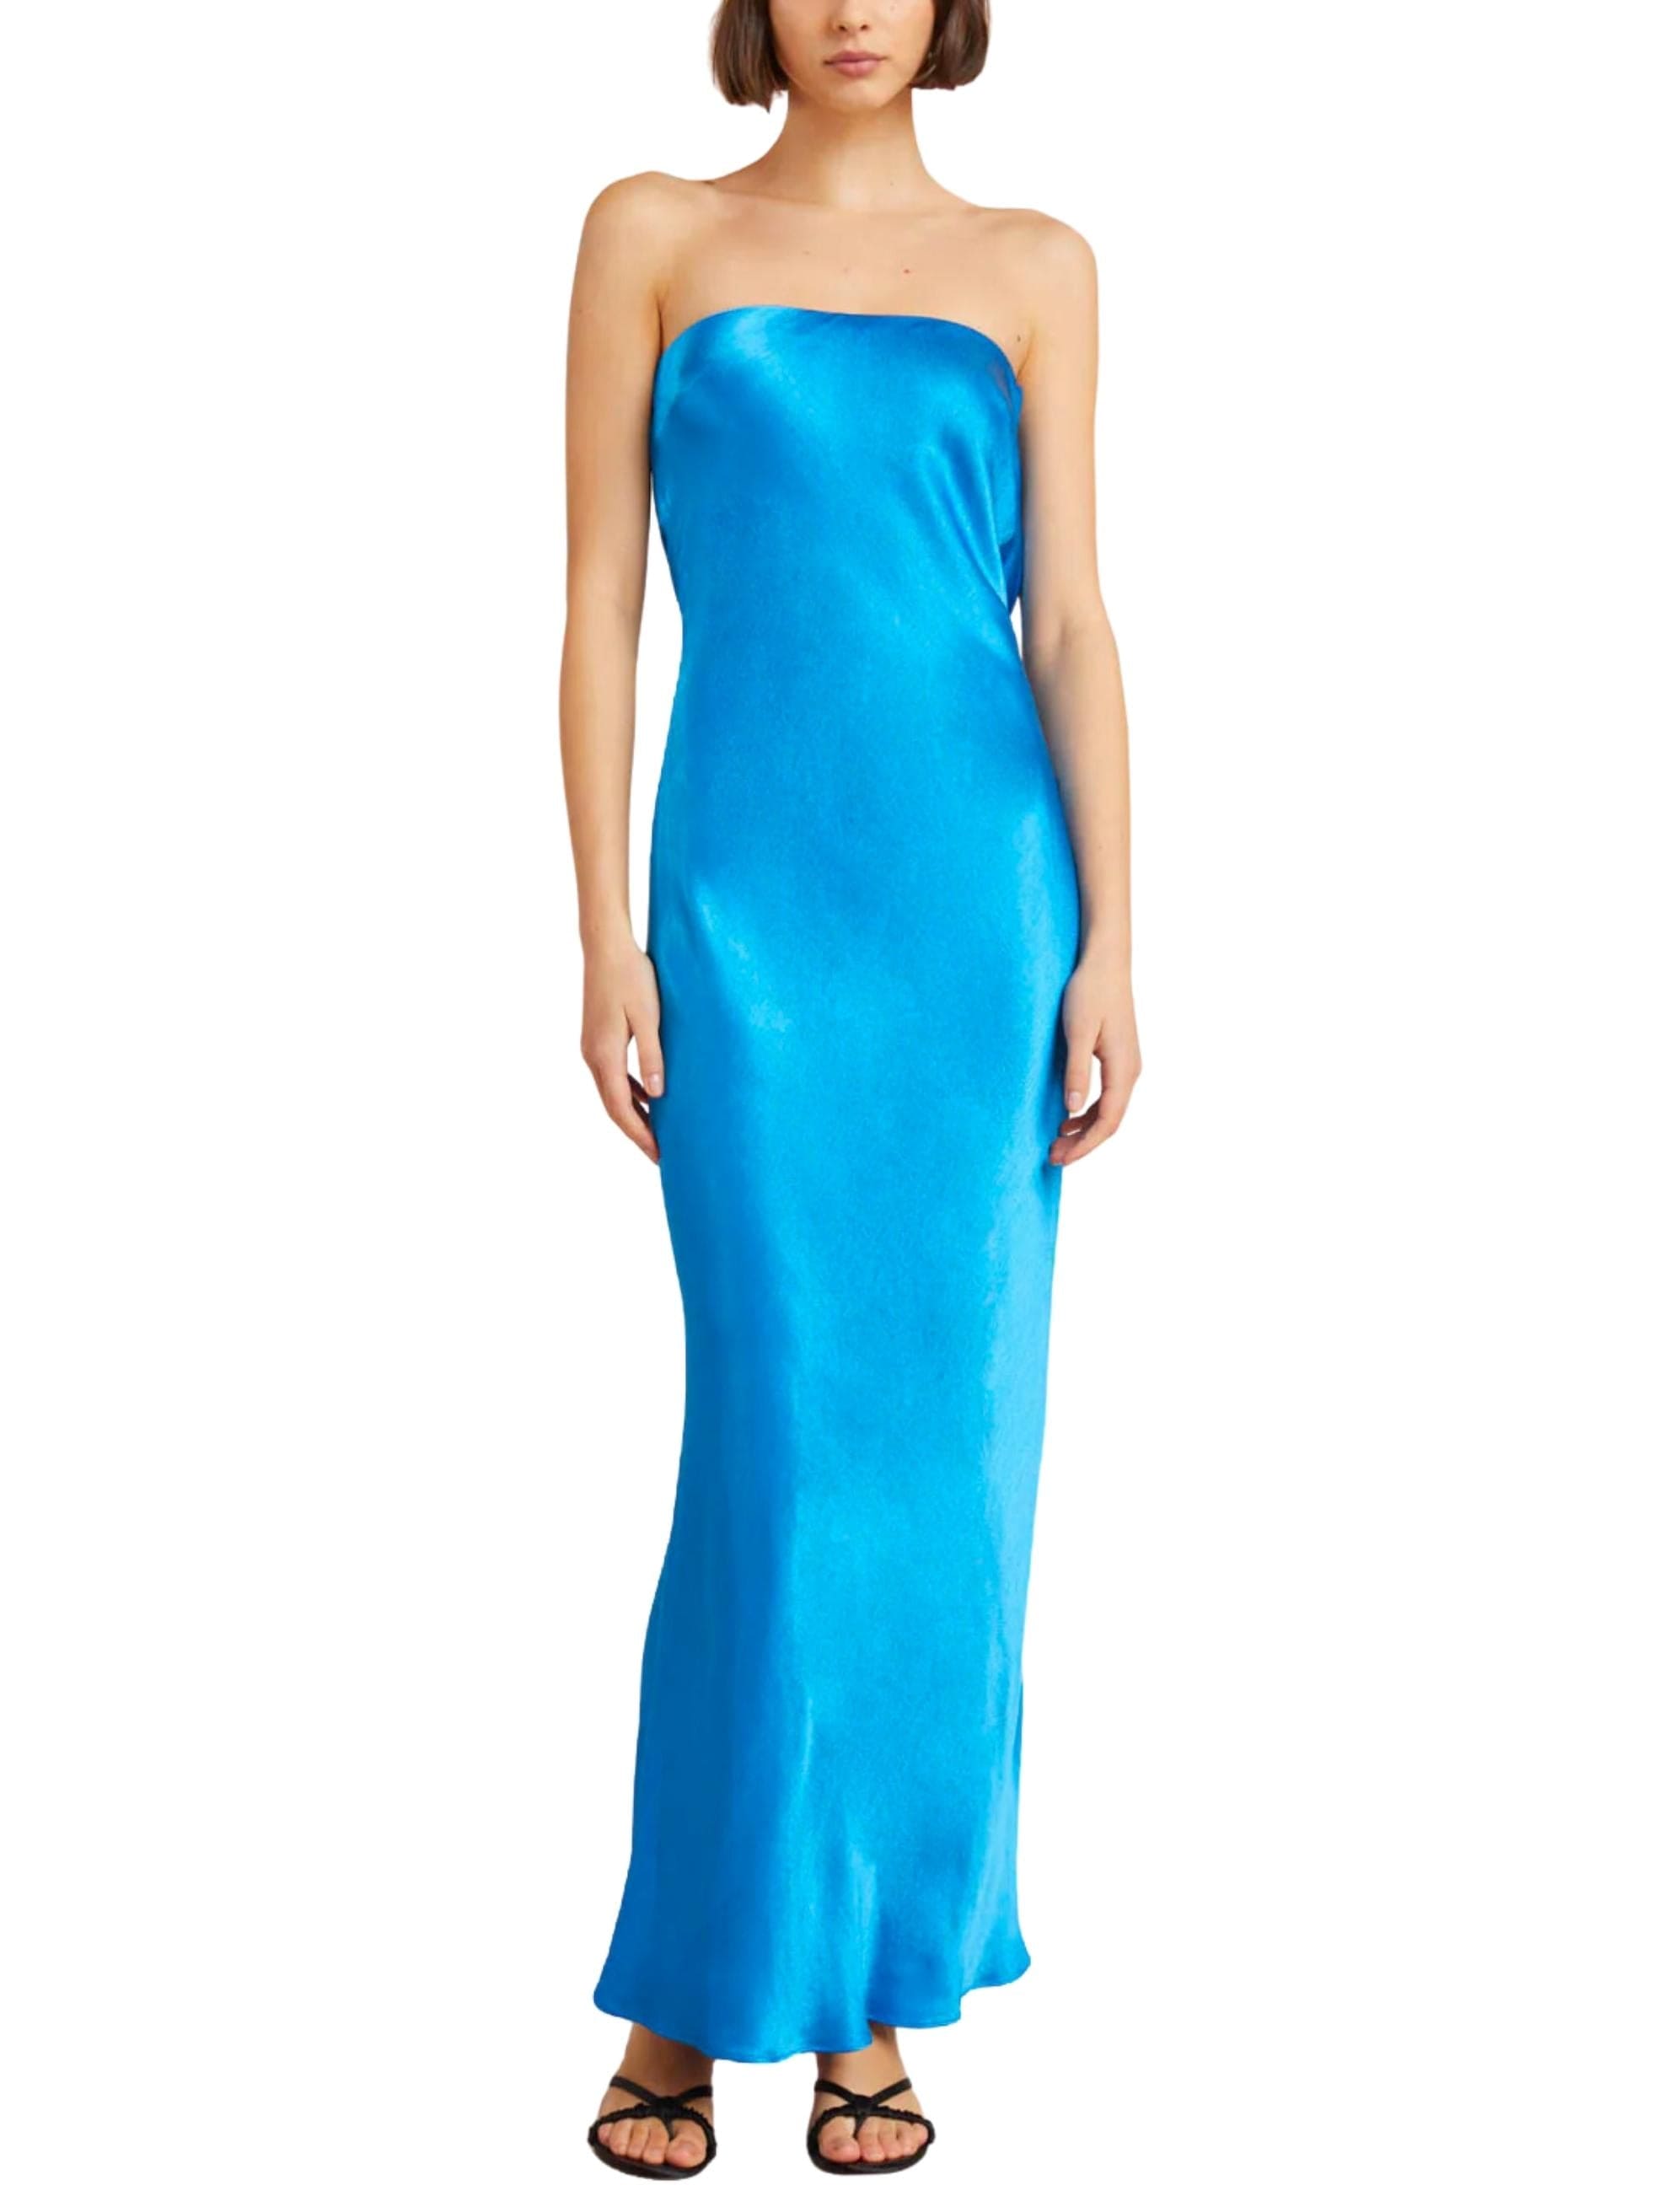 Moon Dance Strapless Dress in Mid Blue